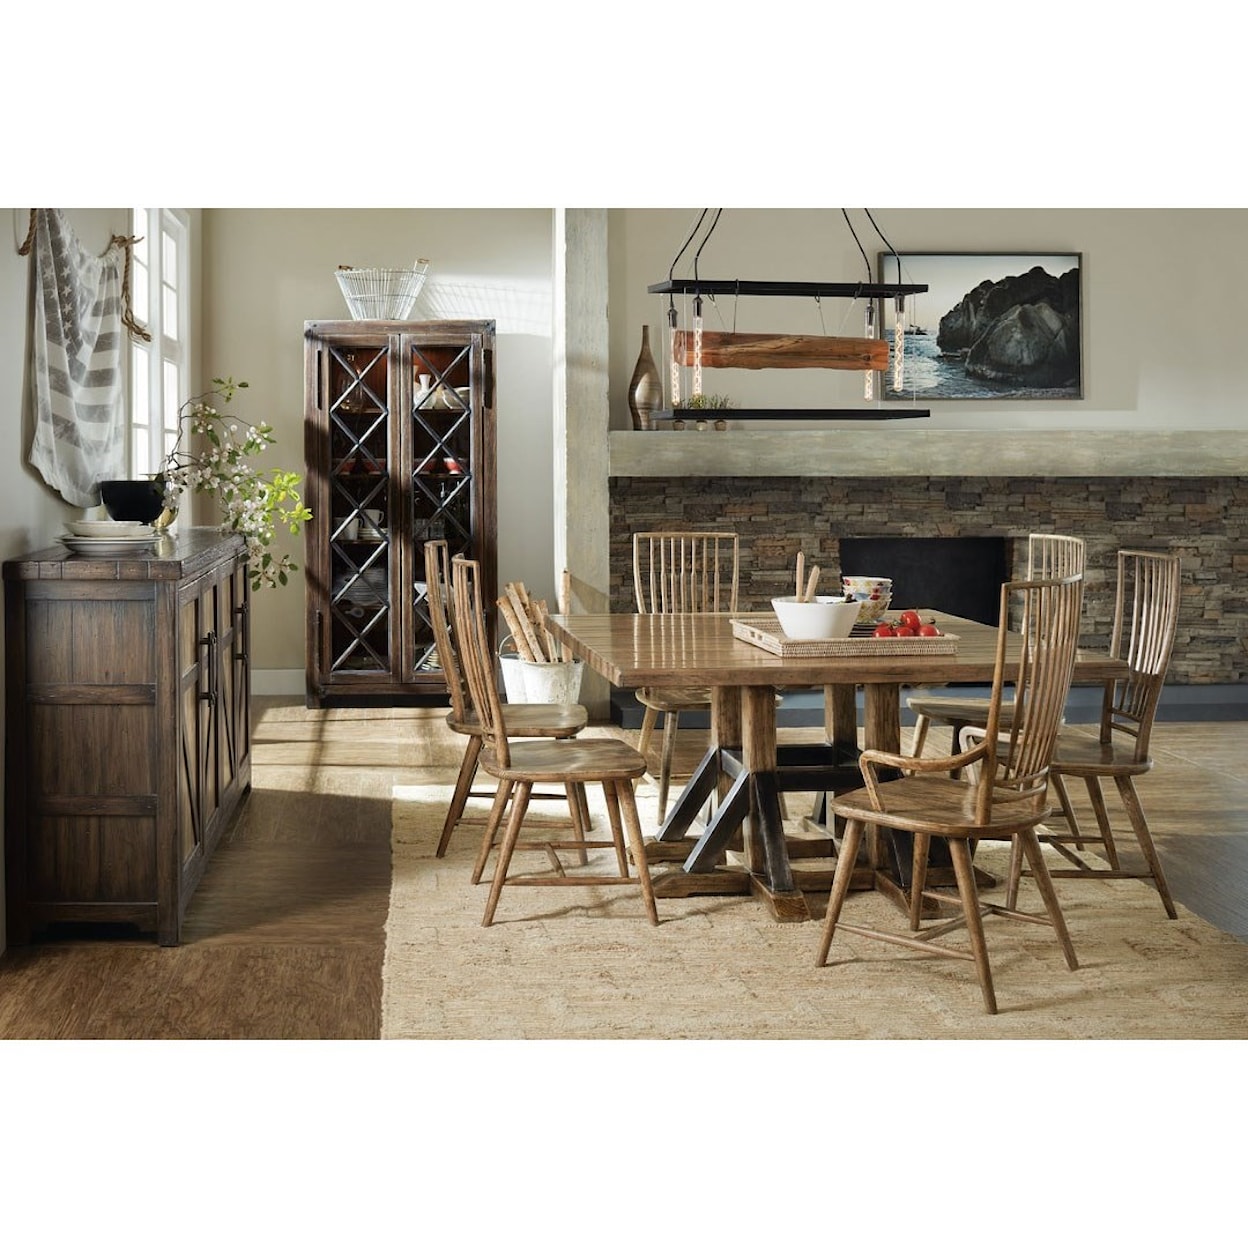 Hooker Furniture American Life - Roslyn County Adjustable Height Square Dining Table